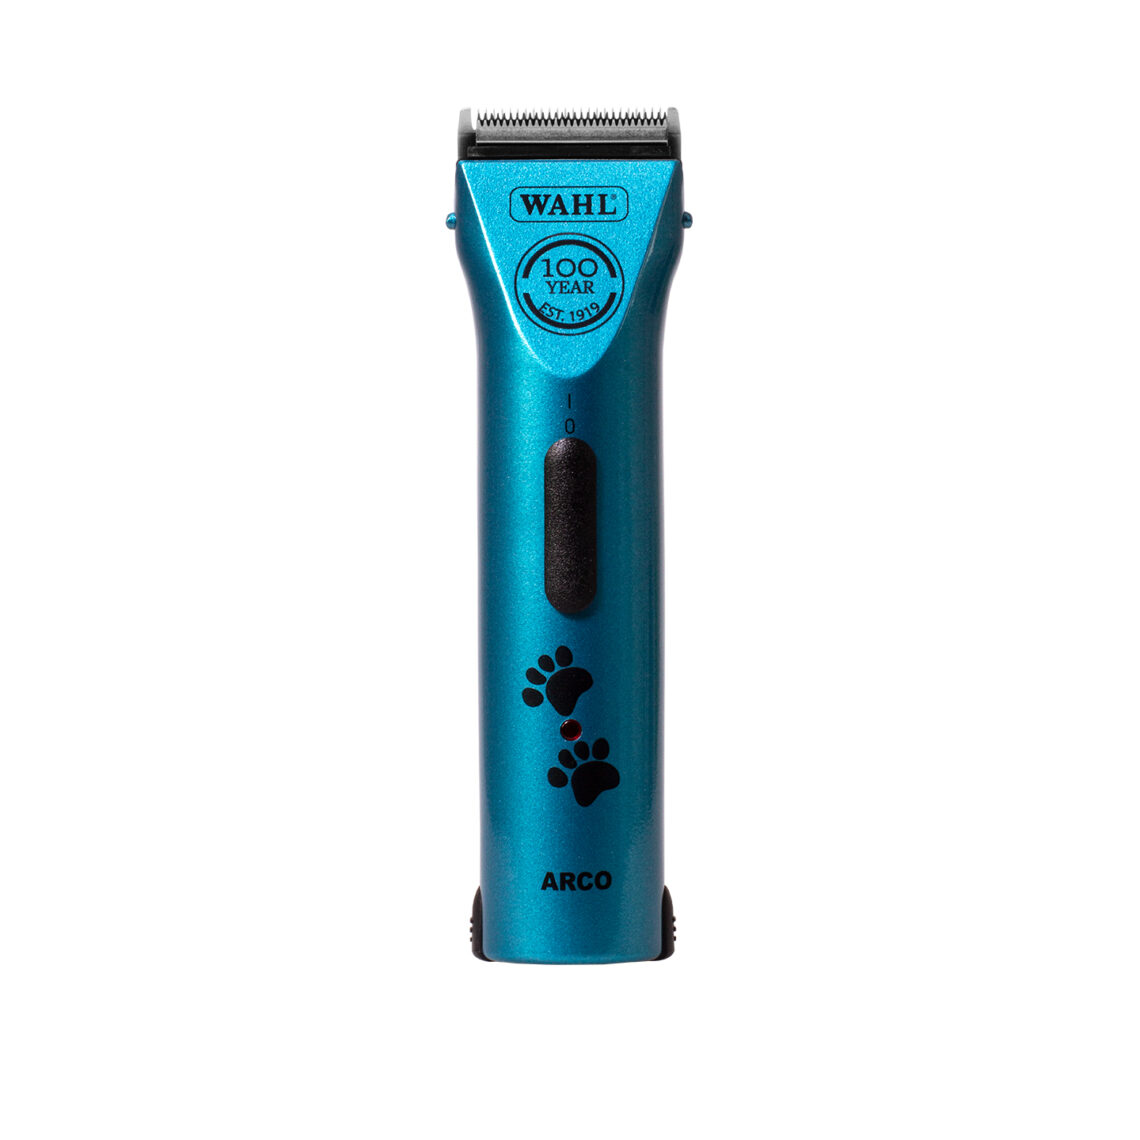 dog clippers cordless uk